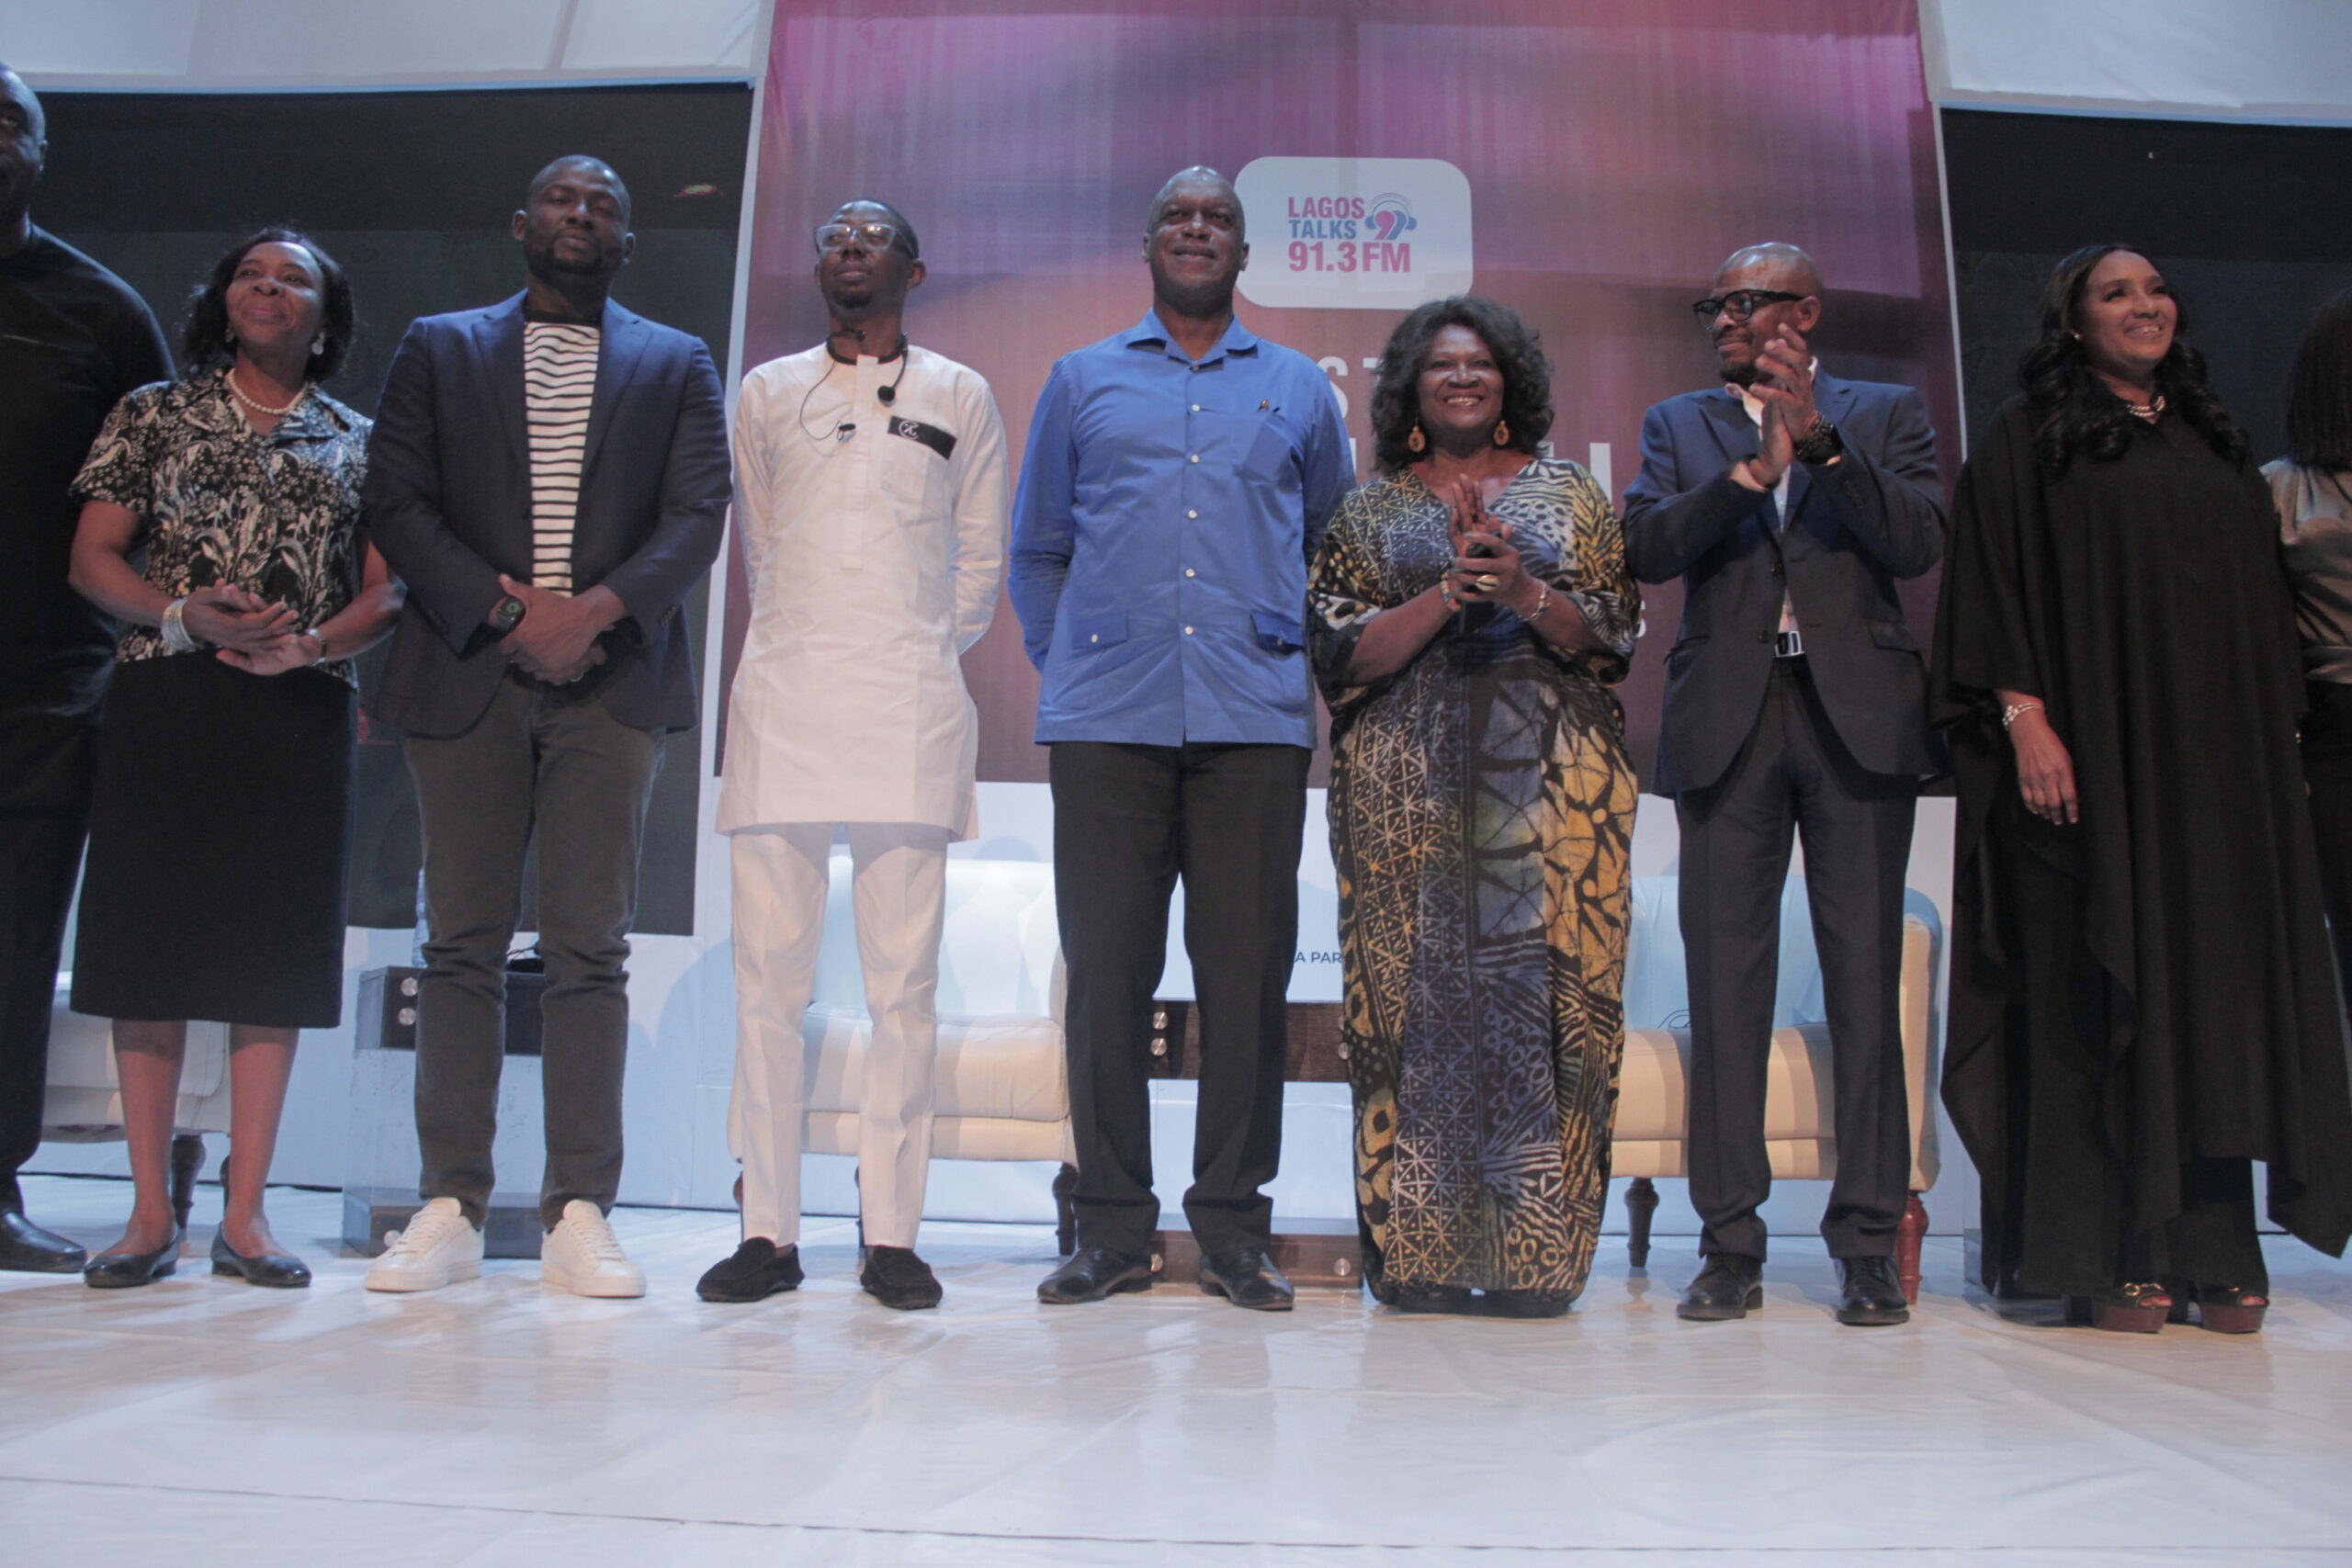 Lagos Talks hosted its First Town Hall Meeting at ... Image